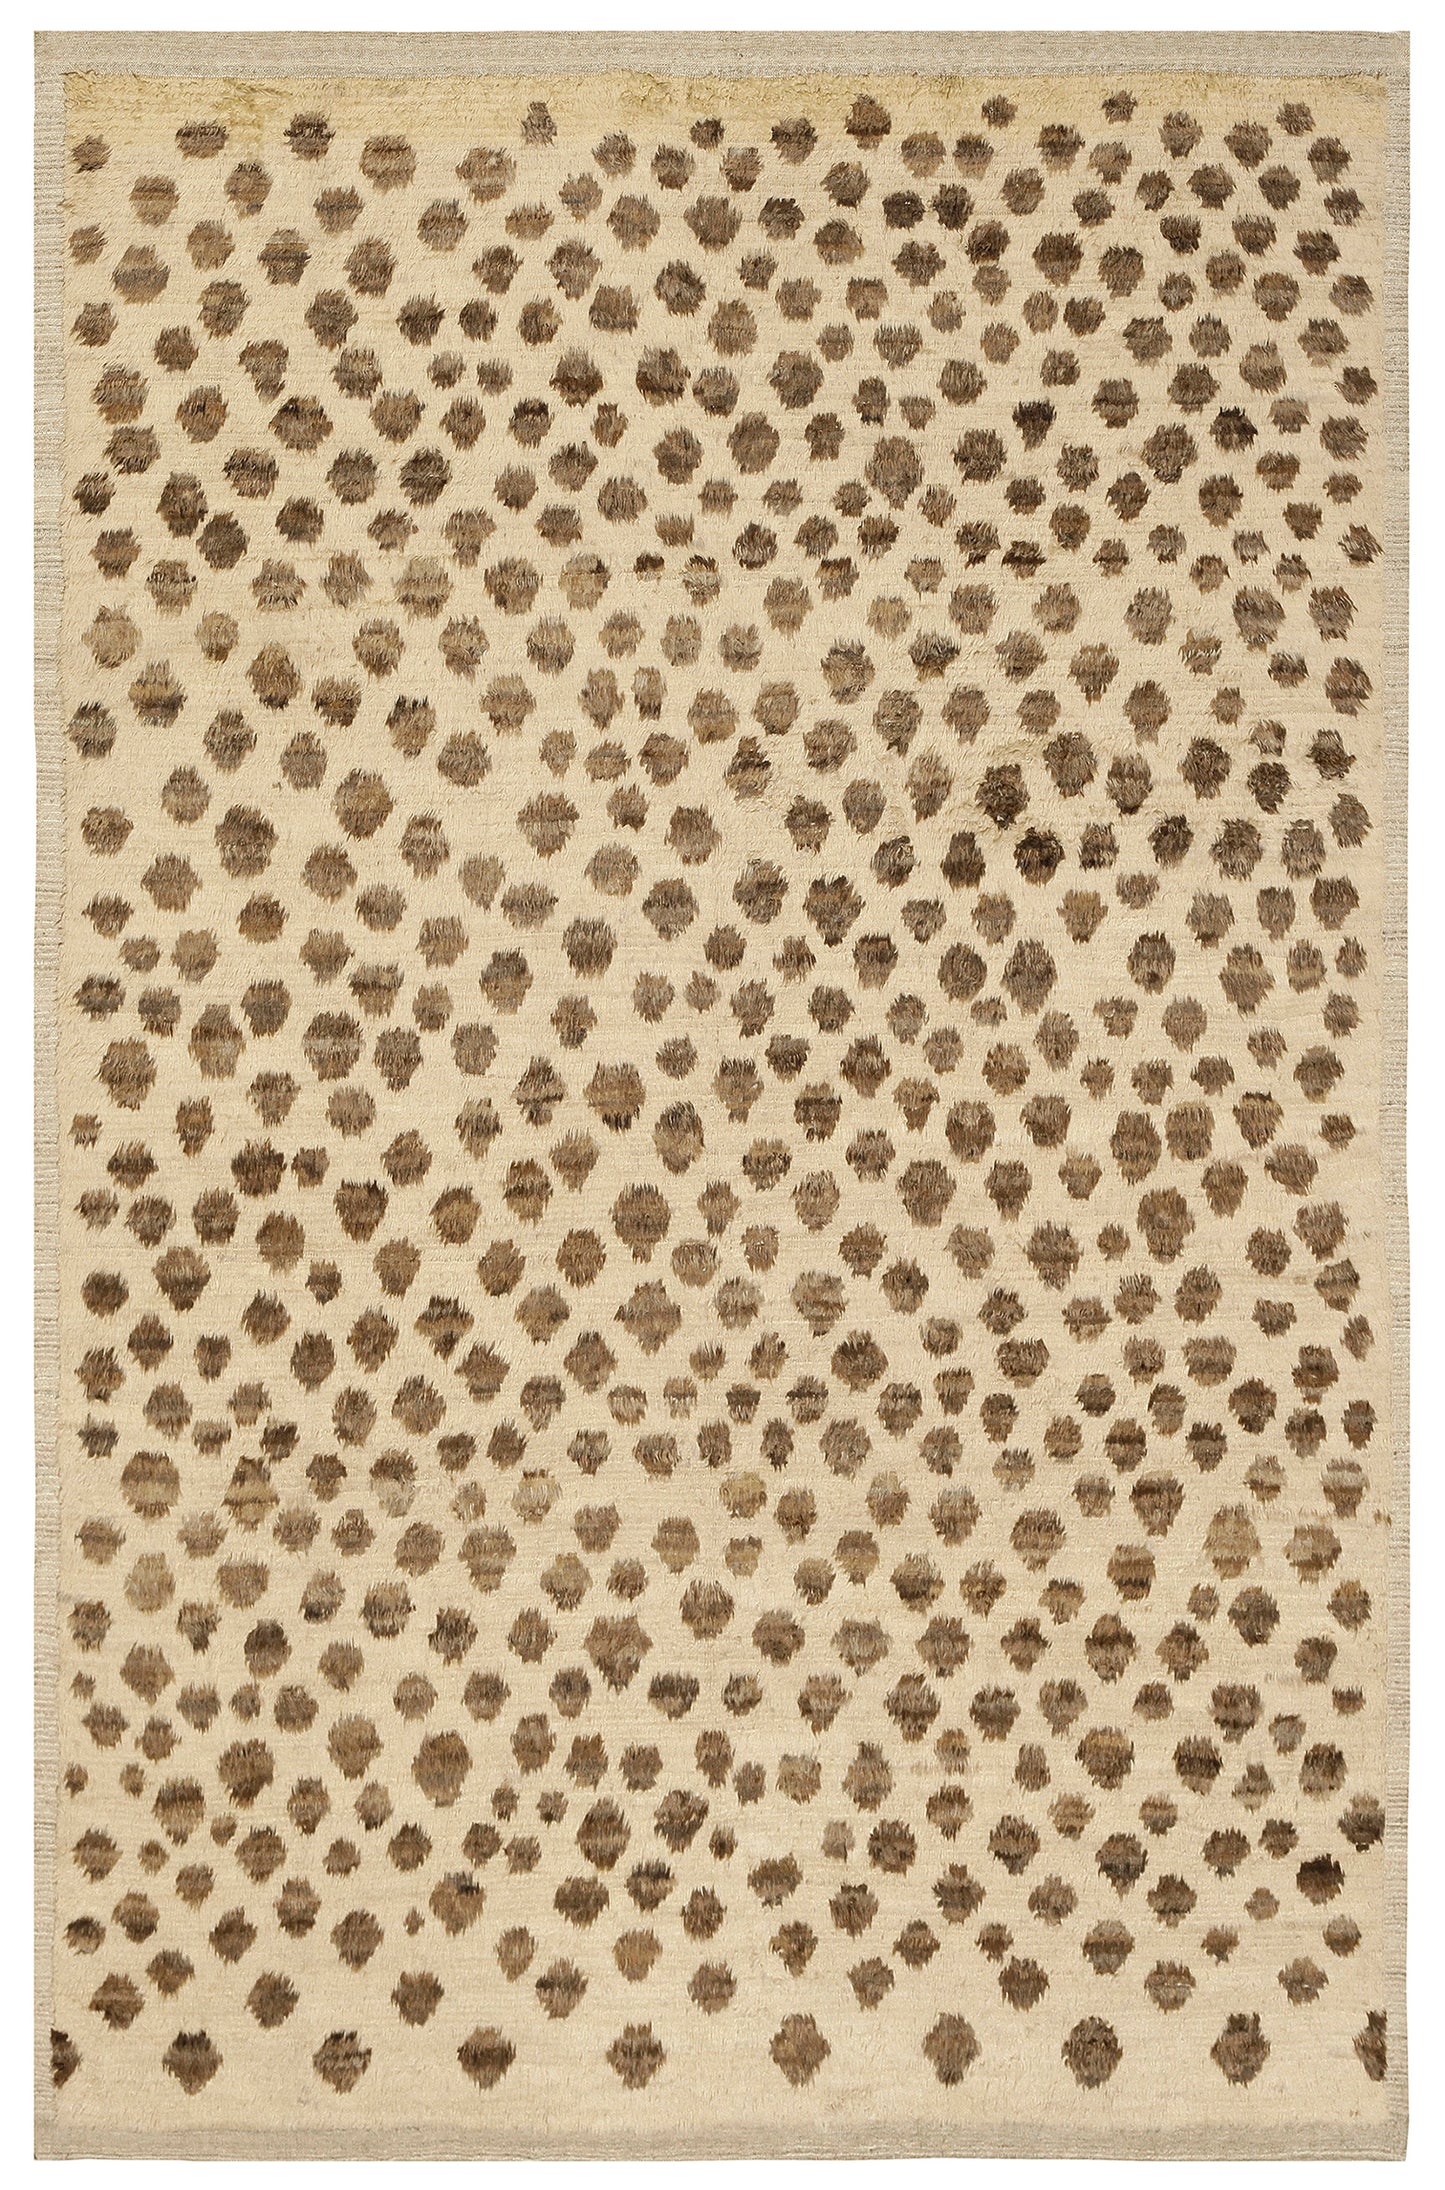 11'x8' Ariana Moroccan Style Ivory Brown Barchi Rug